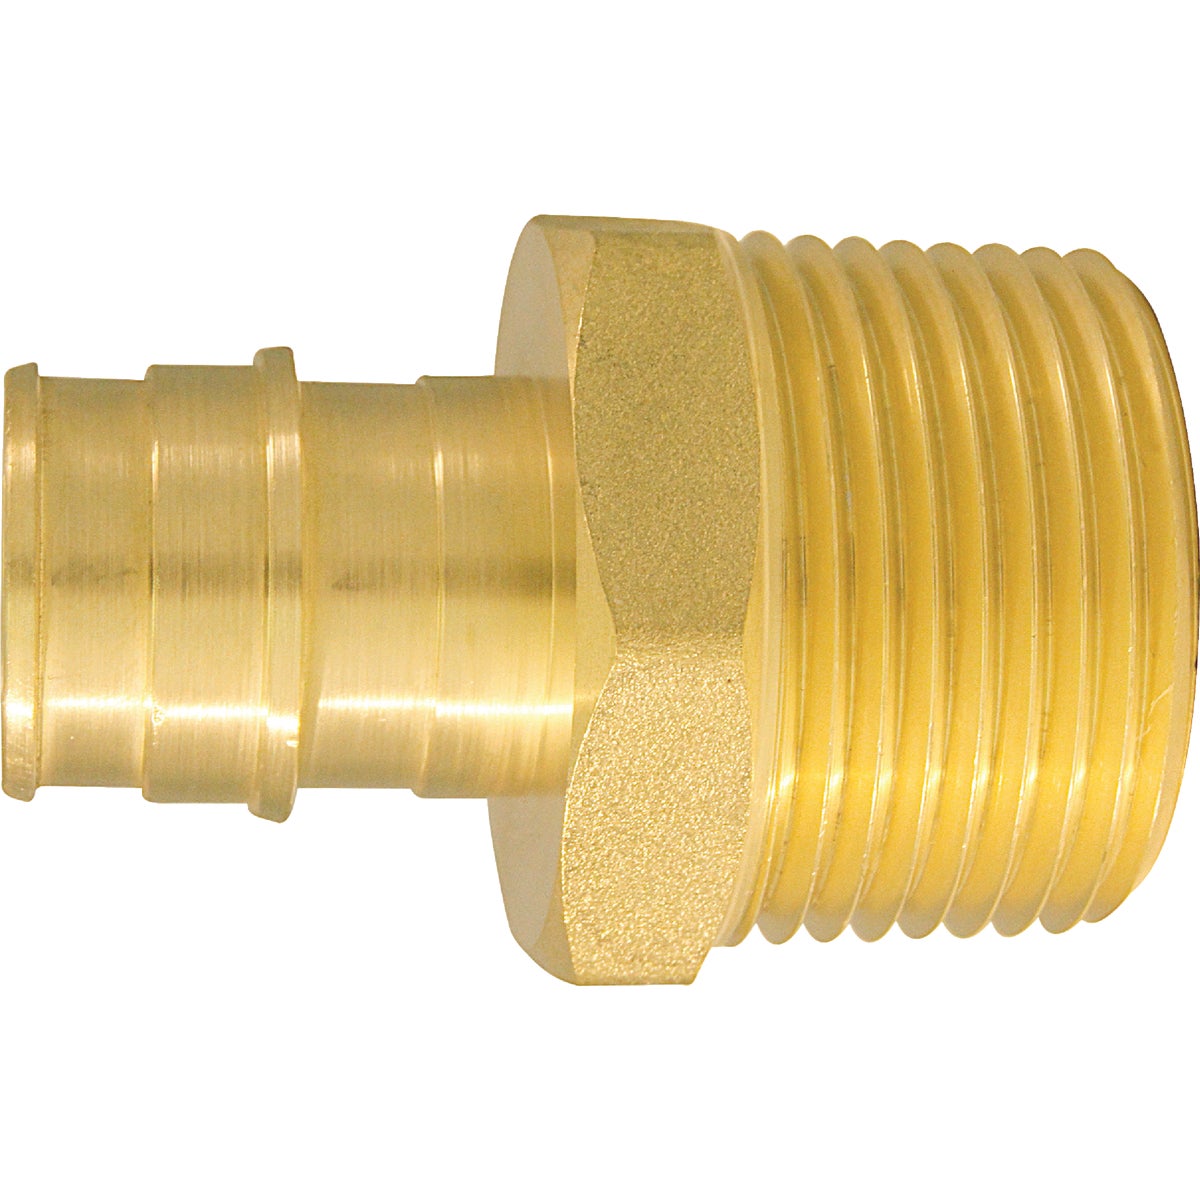 Apollo Retail 3/4 In. x 1 In. Brass Insert Fitting MIP PEX A Adapter